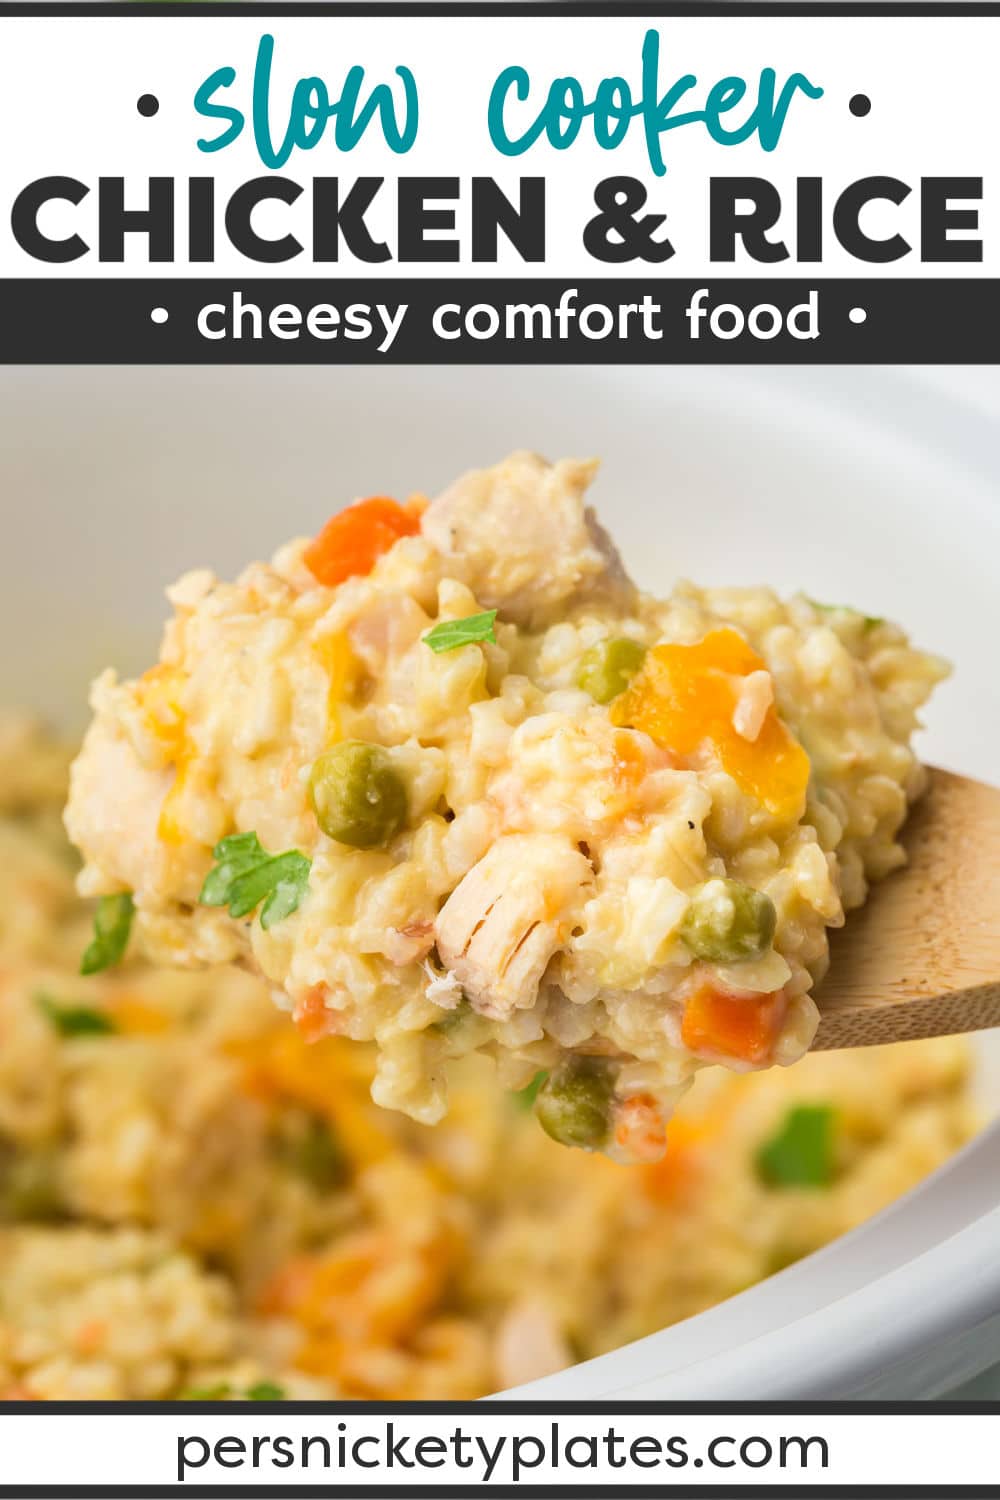 Slow Cooker Chicken & Rice is a classic dinner idea for the whole family made right in your crockpot. Creamy rice mixed with tender chicken and veggies makes an easy meal that is sure to be a hit. | www.persnicketyplates.com